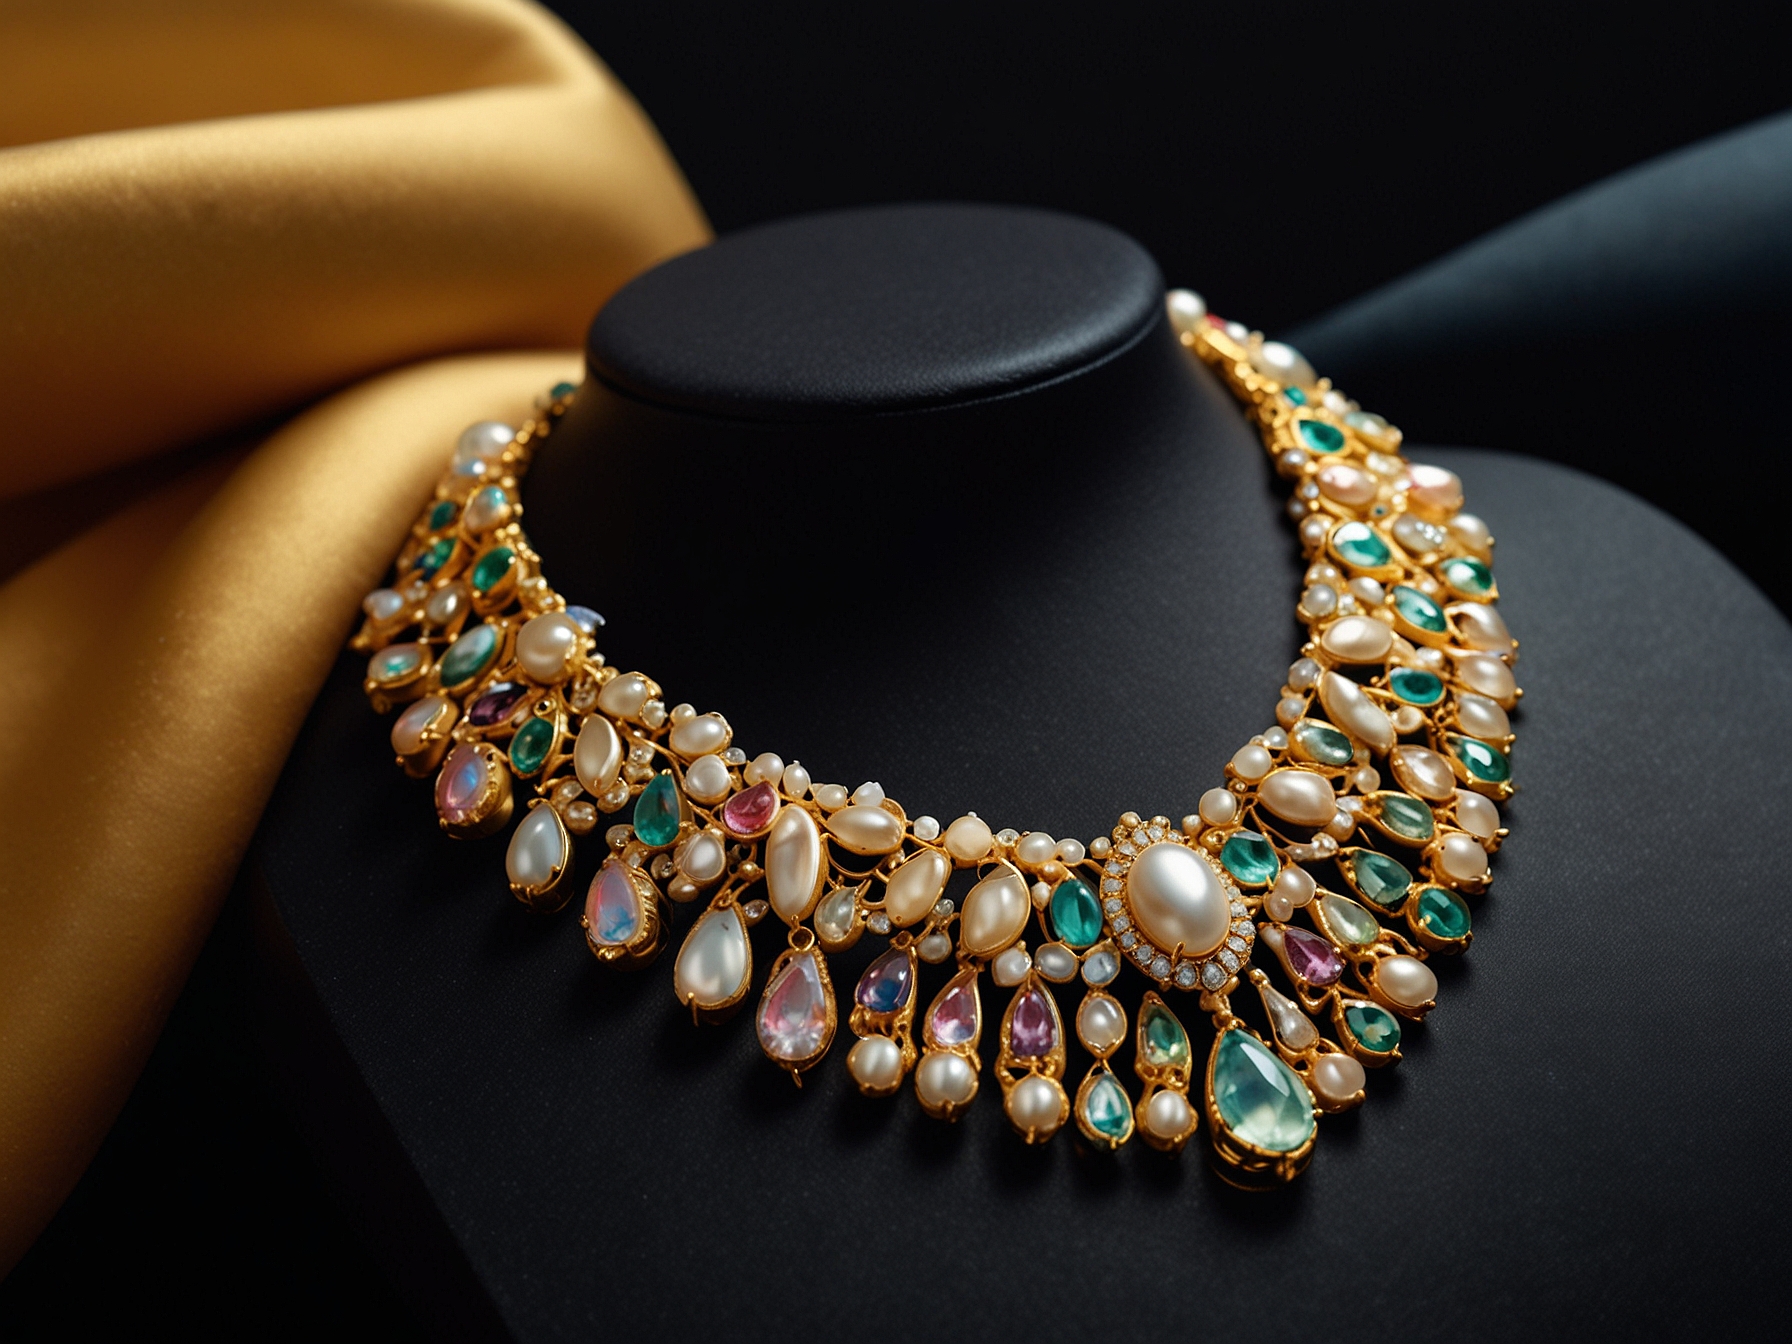 A collection of Kislap Jewelry featuring iridescent pearls and vivid gemstones set in intricate goldwork, illustrating the fusion of Filipino craftsmanship and contemporary design.